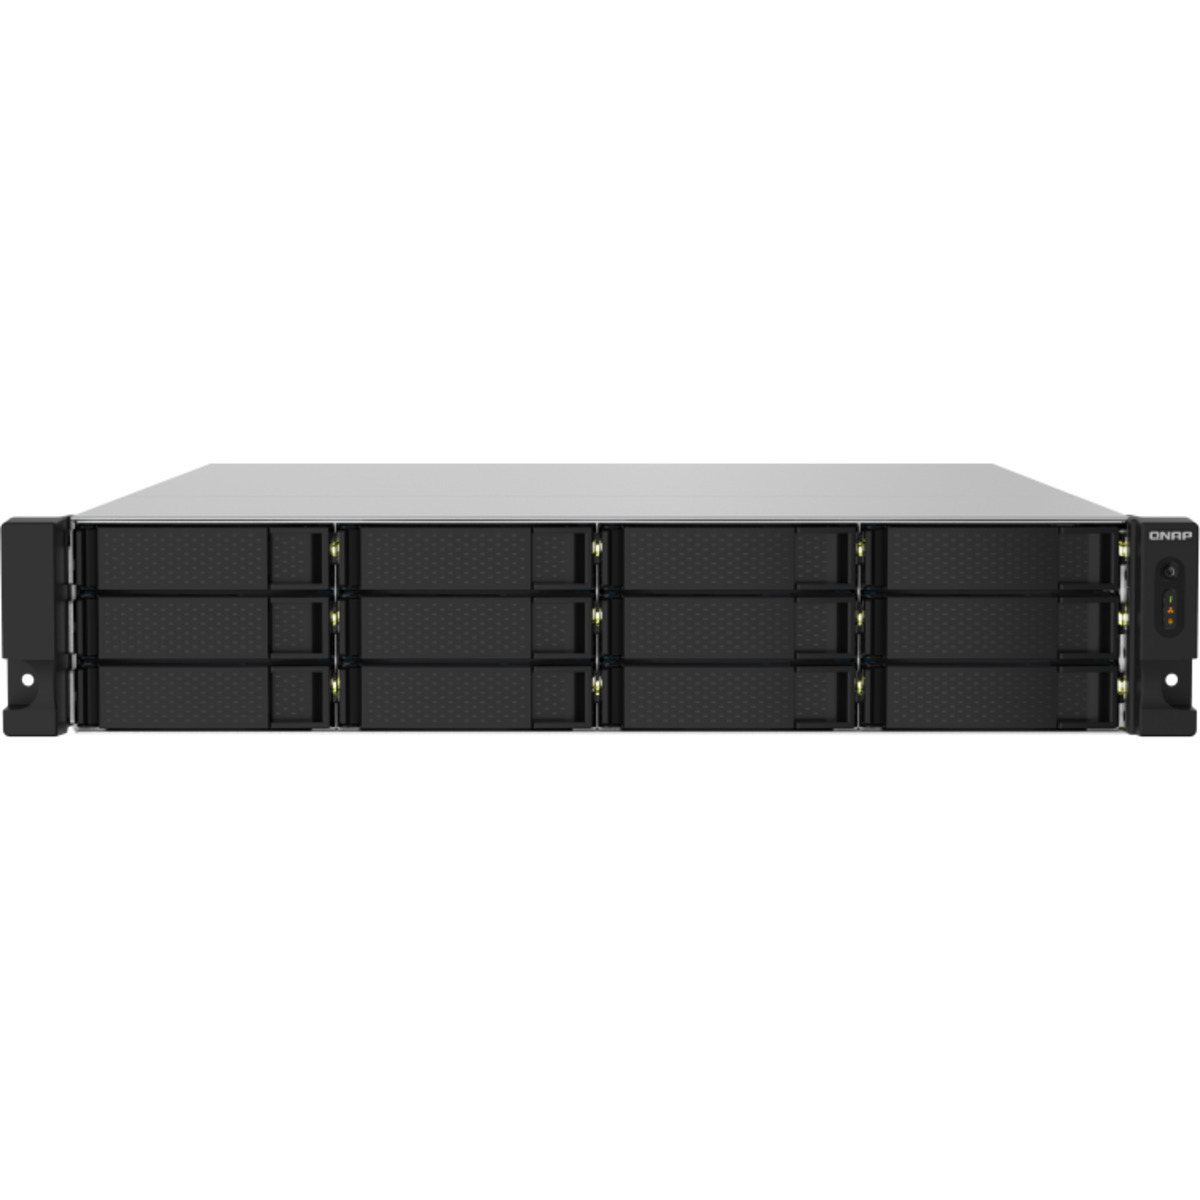 QNAP TS-1232PXU-RP 44tb 12-Bay RackMount Personal / Basic Home / Small Office NAS - Network Attached Storage Device 11x4tb Seagate IronWolf ST4000VN006 3.5 5400rpm SATA 6Gb/s HDD NAS Class Drives Installed - Burn-In Tested - FREE RAM UPGRADE TS-1232PXU-RP